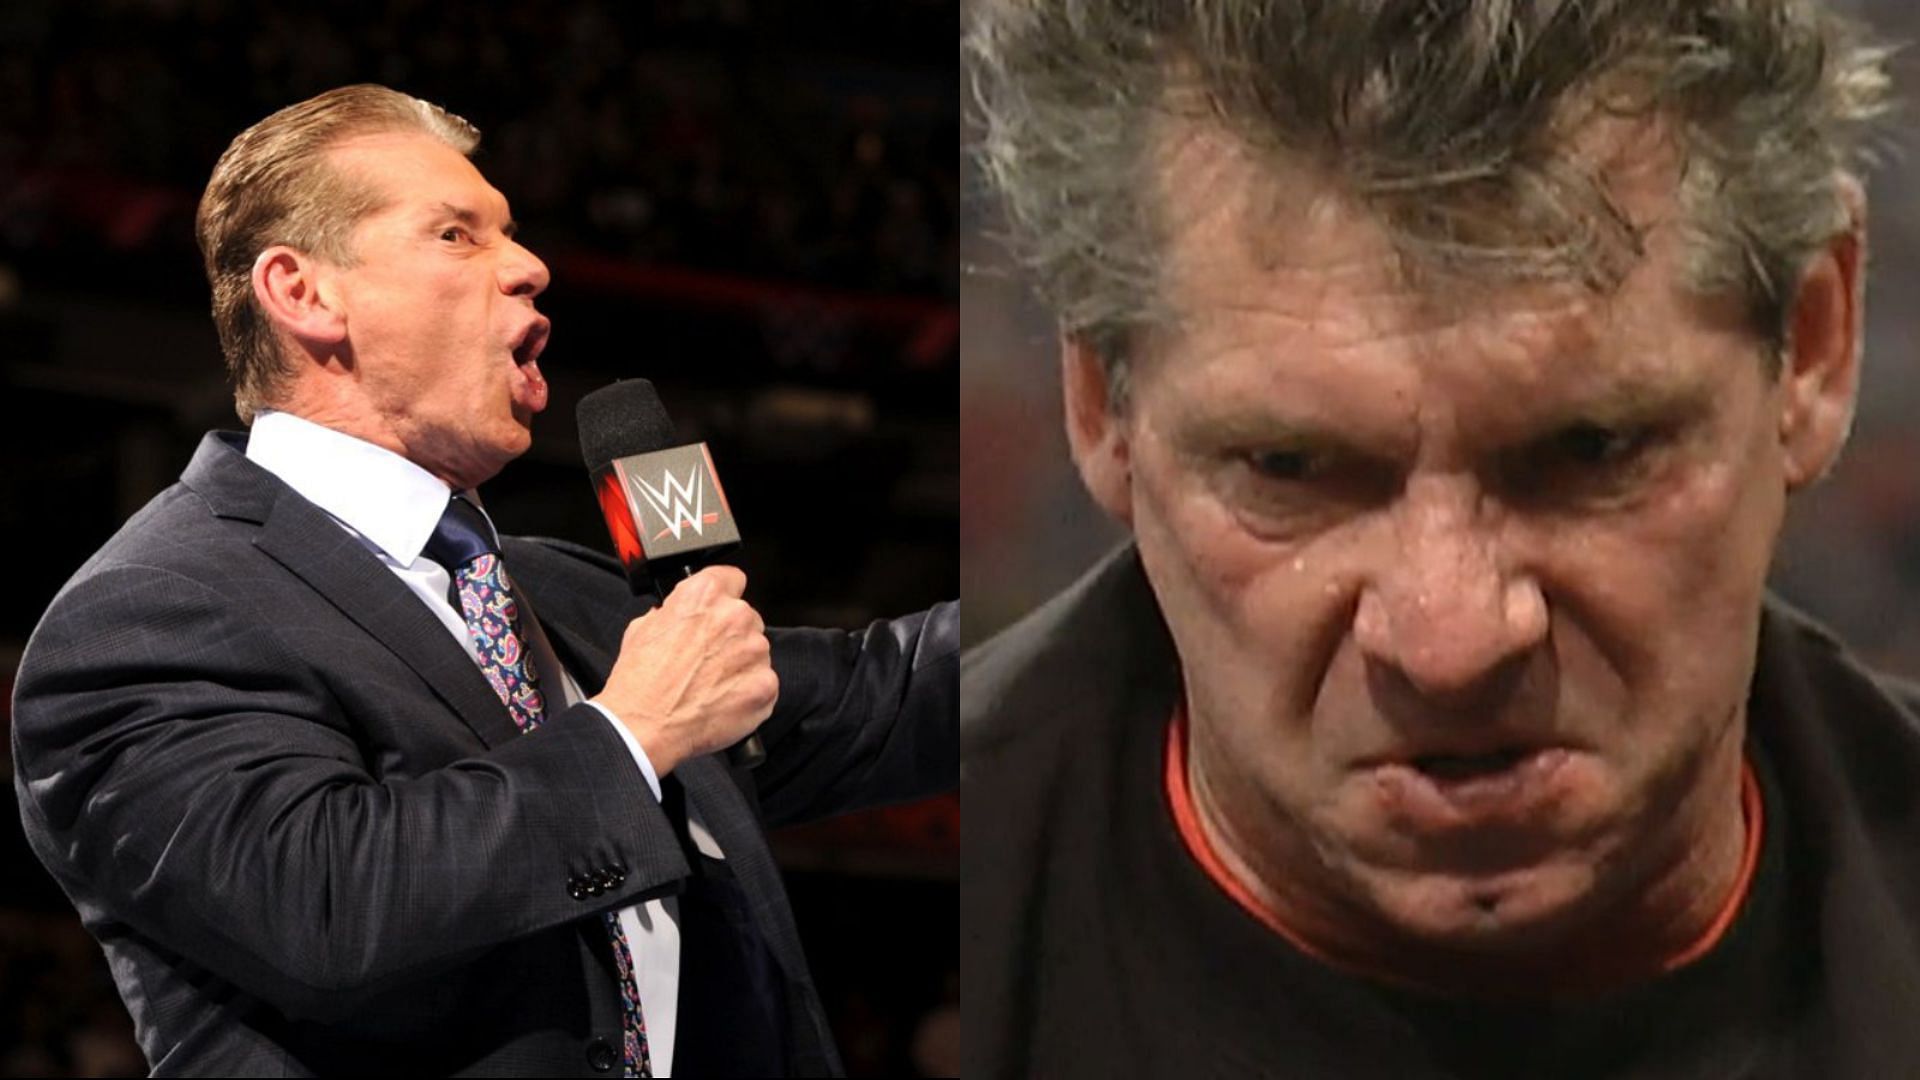 Vince McMahon is no longer the CEO of WWE